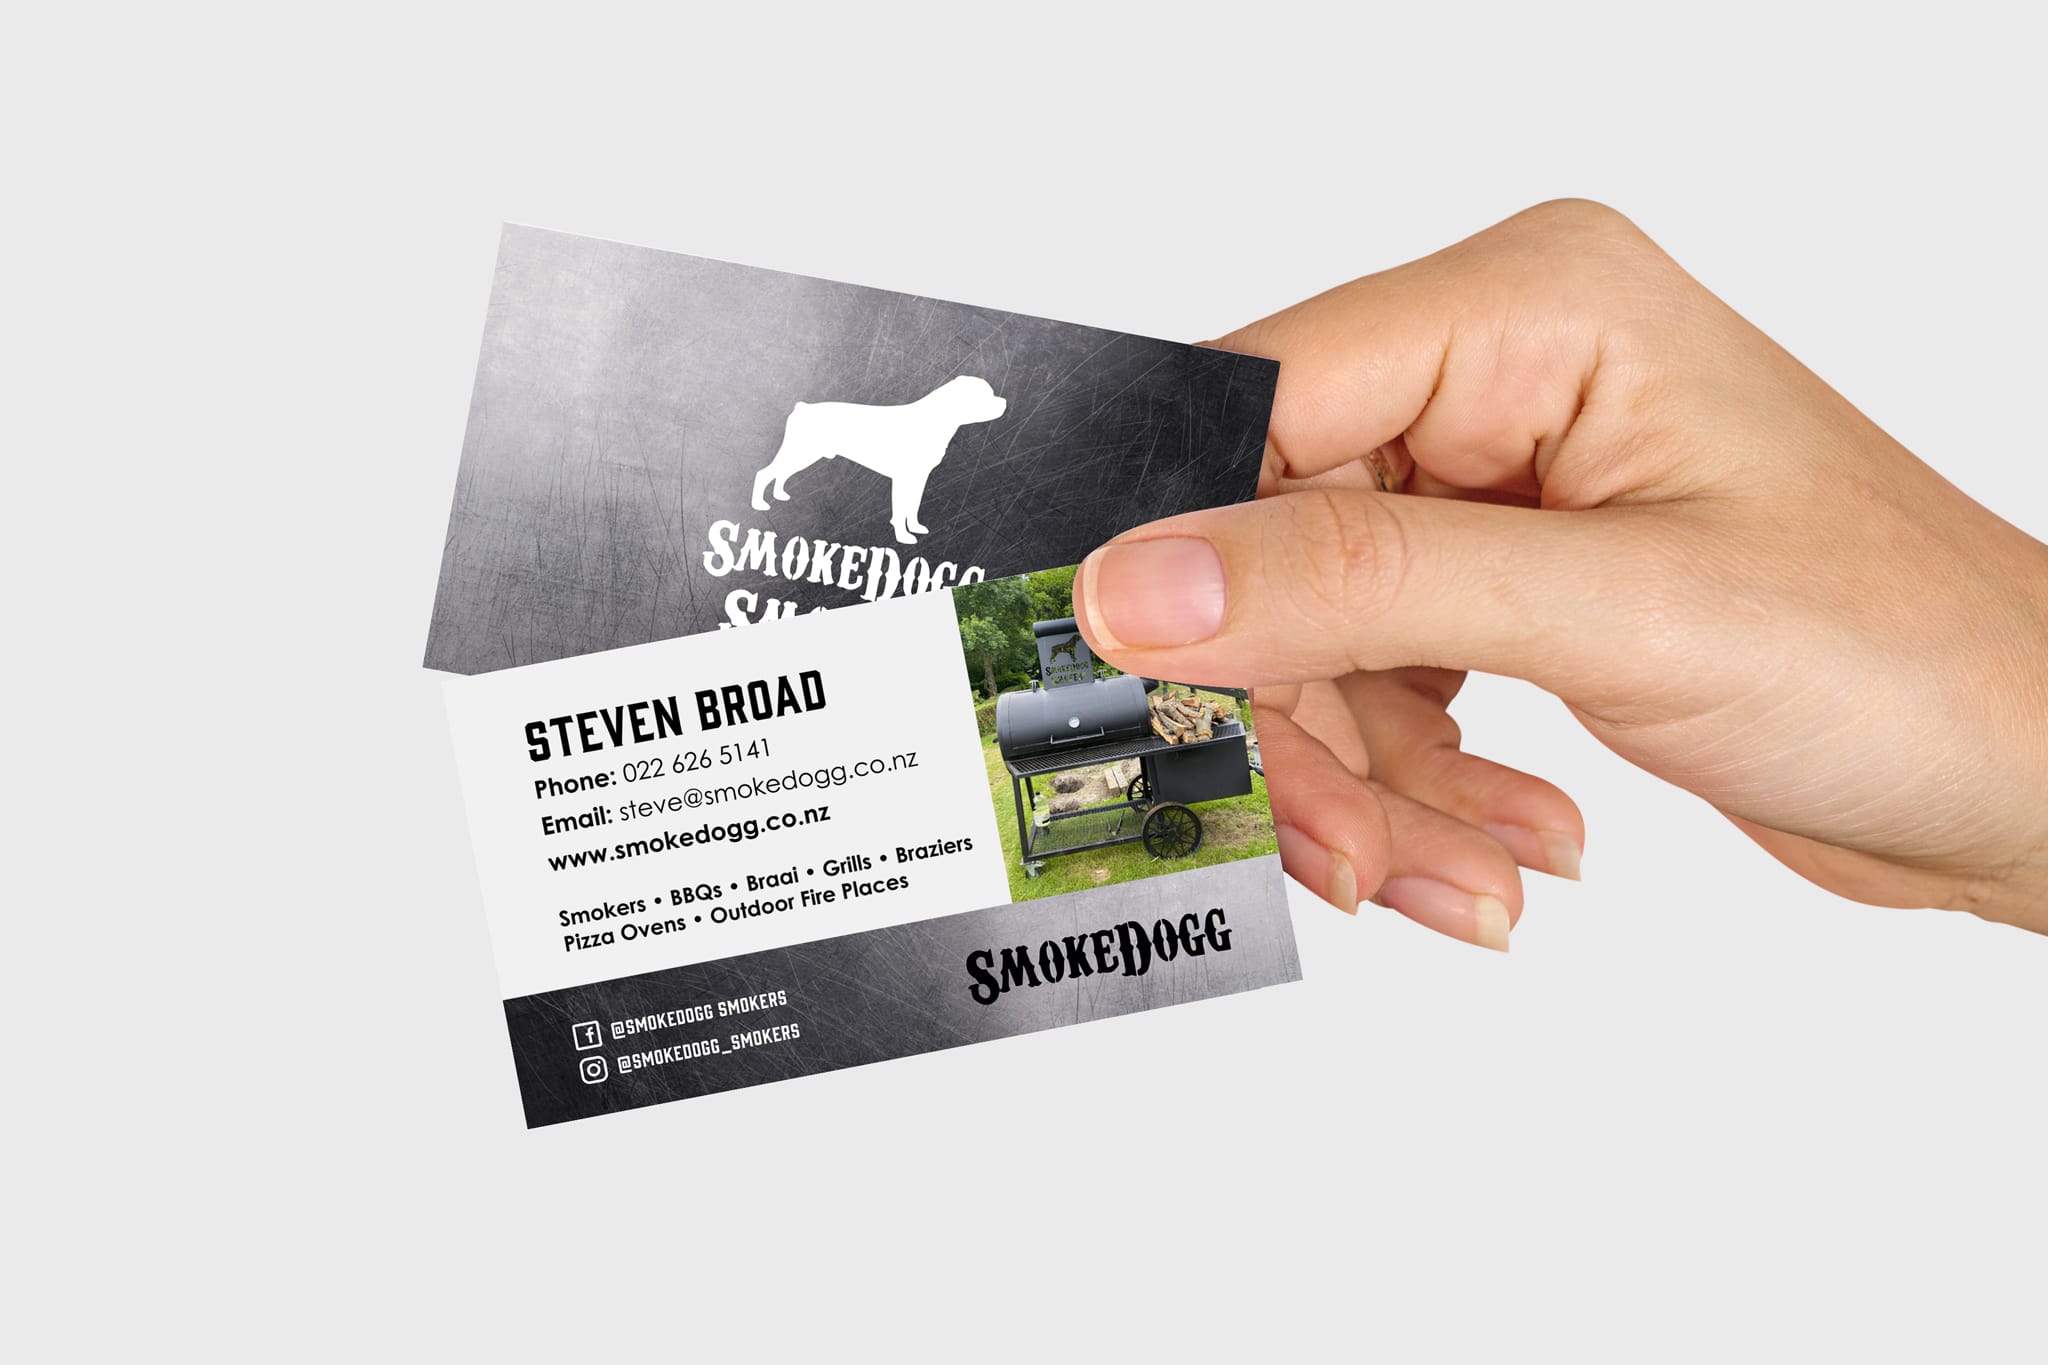 Smokedogg Smokers Business Cards designed by MoMac graphic designers in Rangiora